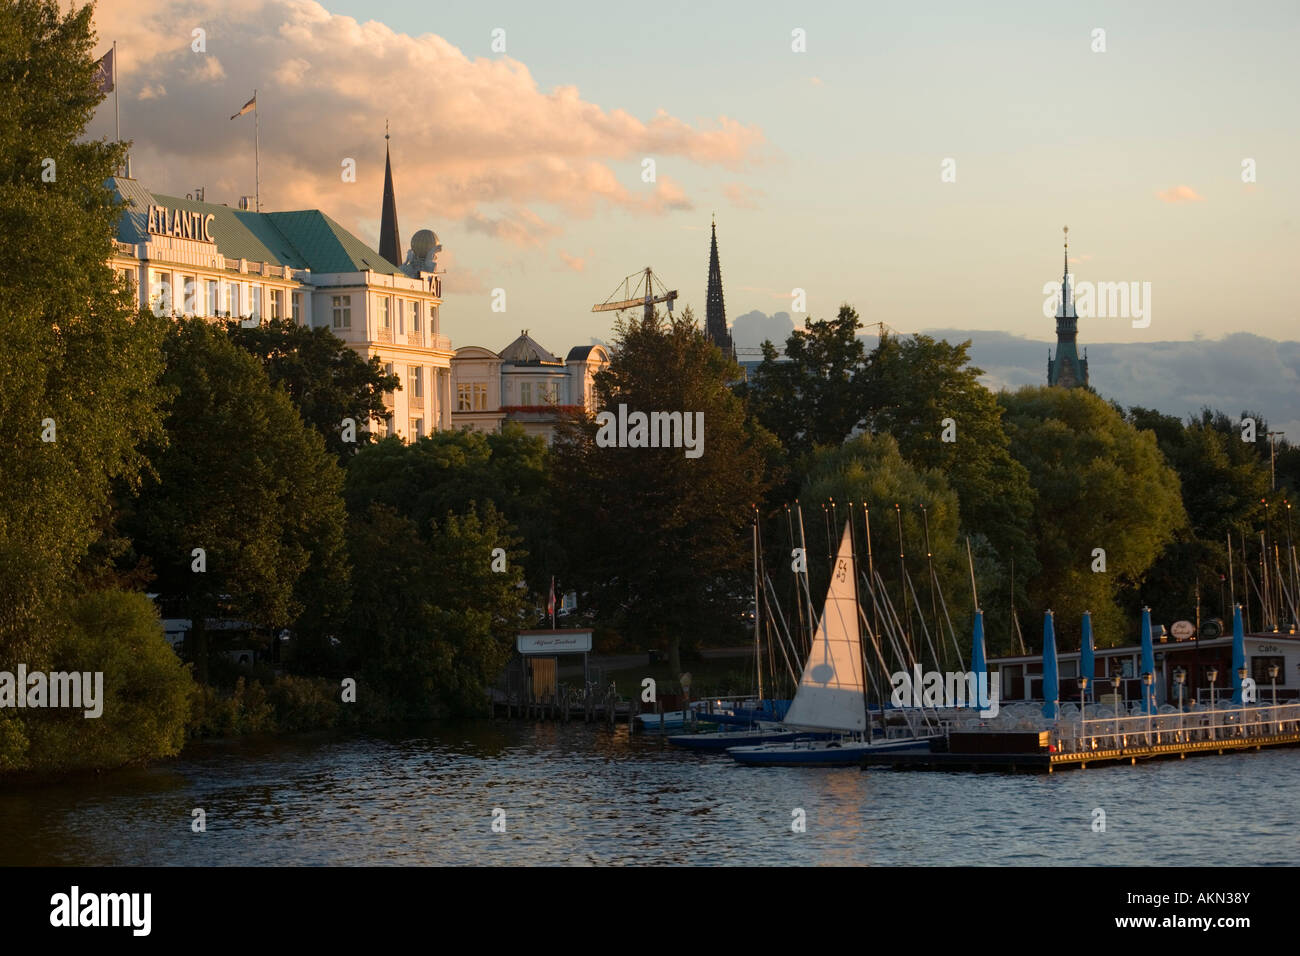 View over lake Alster to the Hotel Atlantic called the white castle at Alster Hamburg Germany Stock Photo